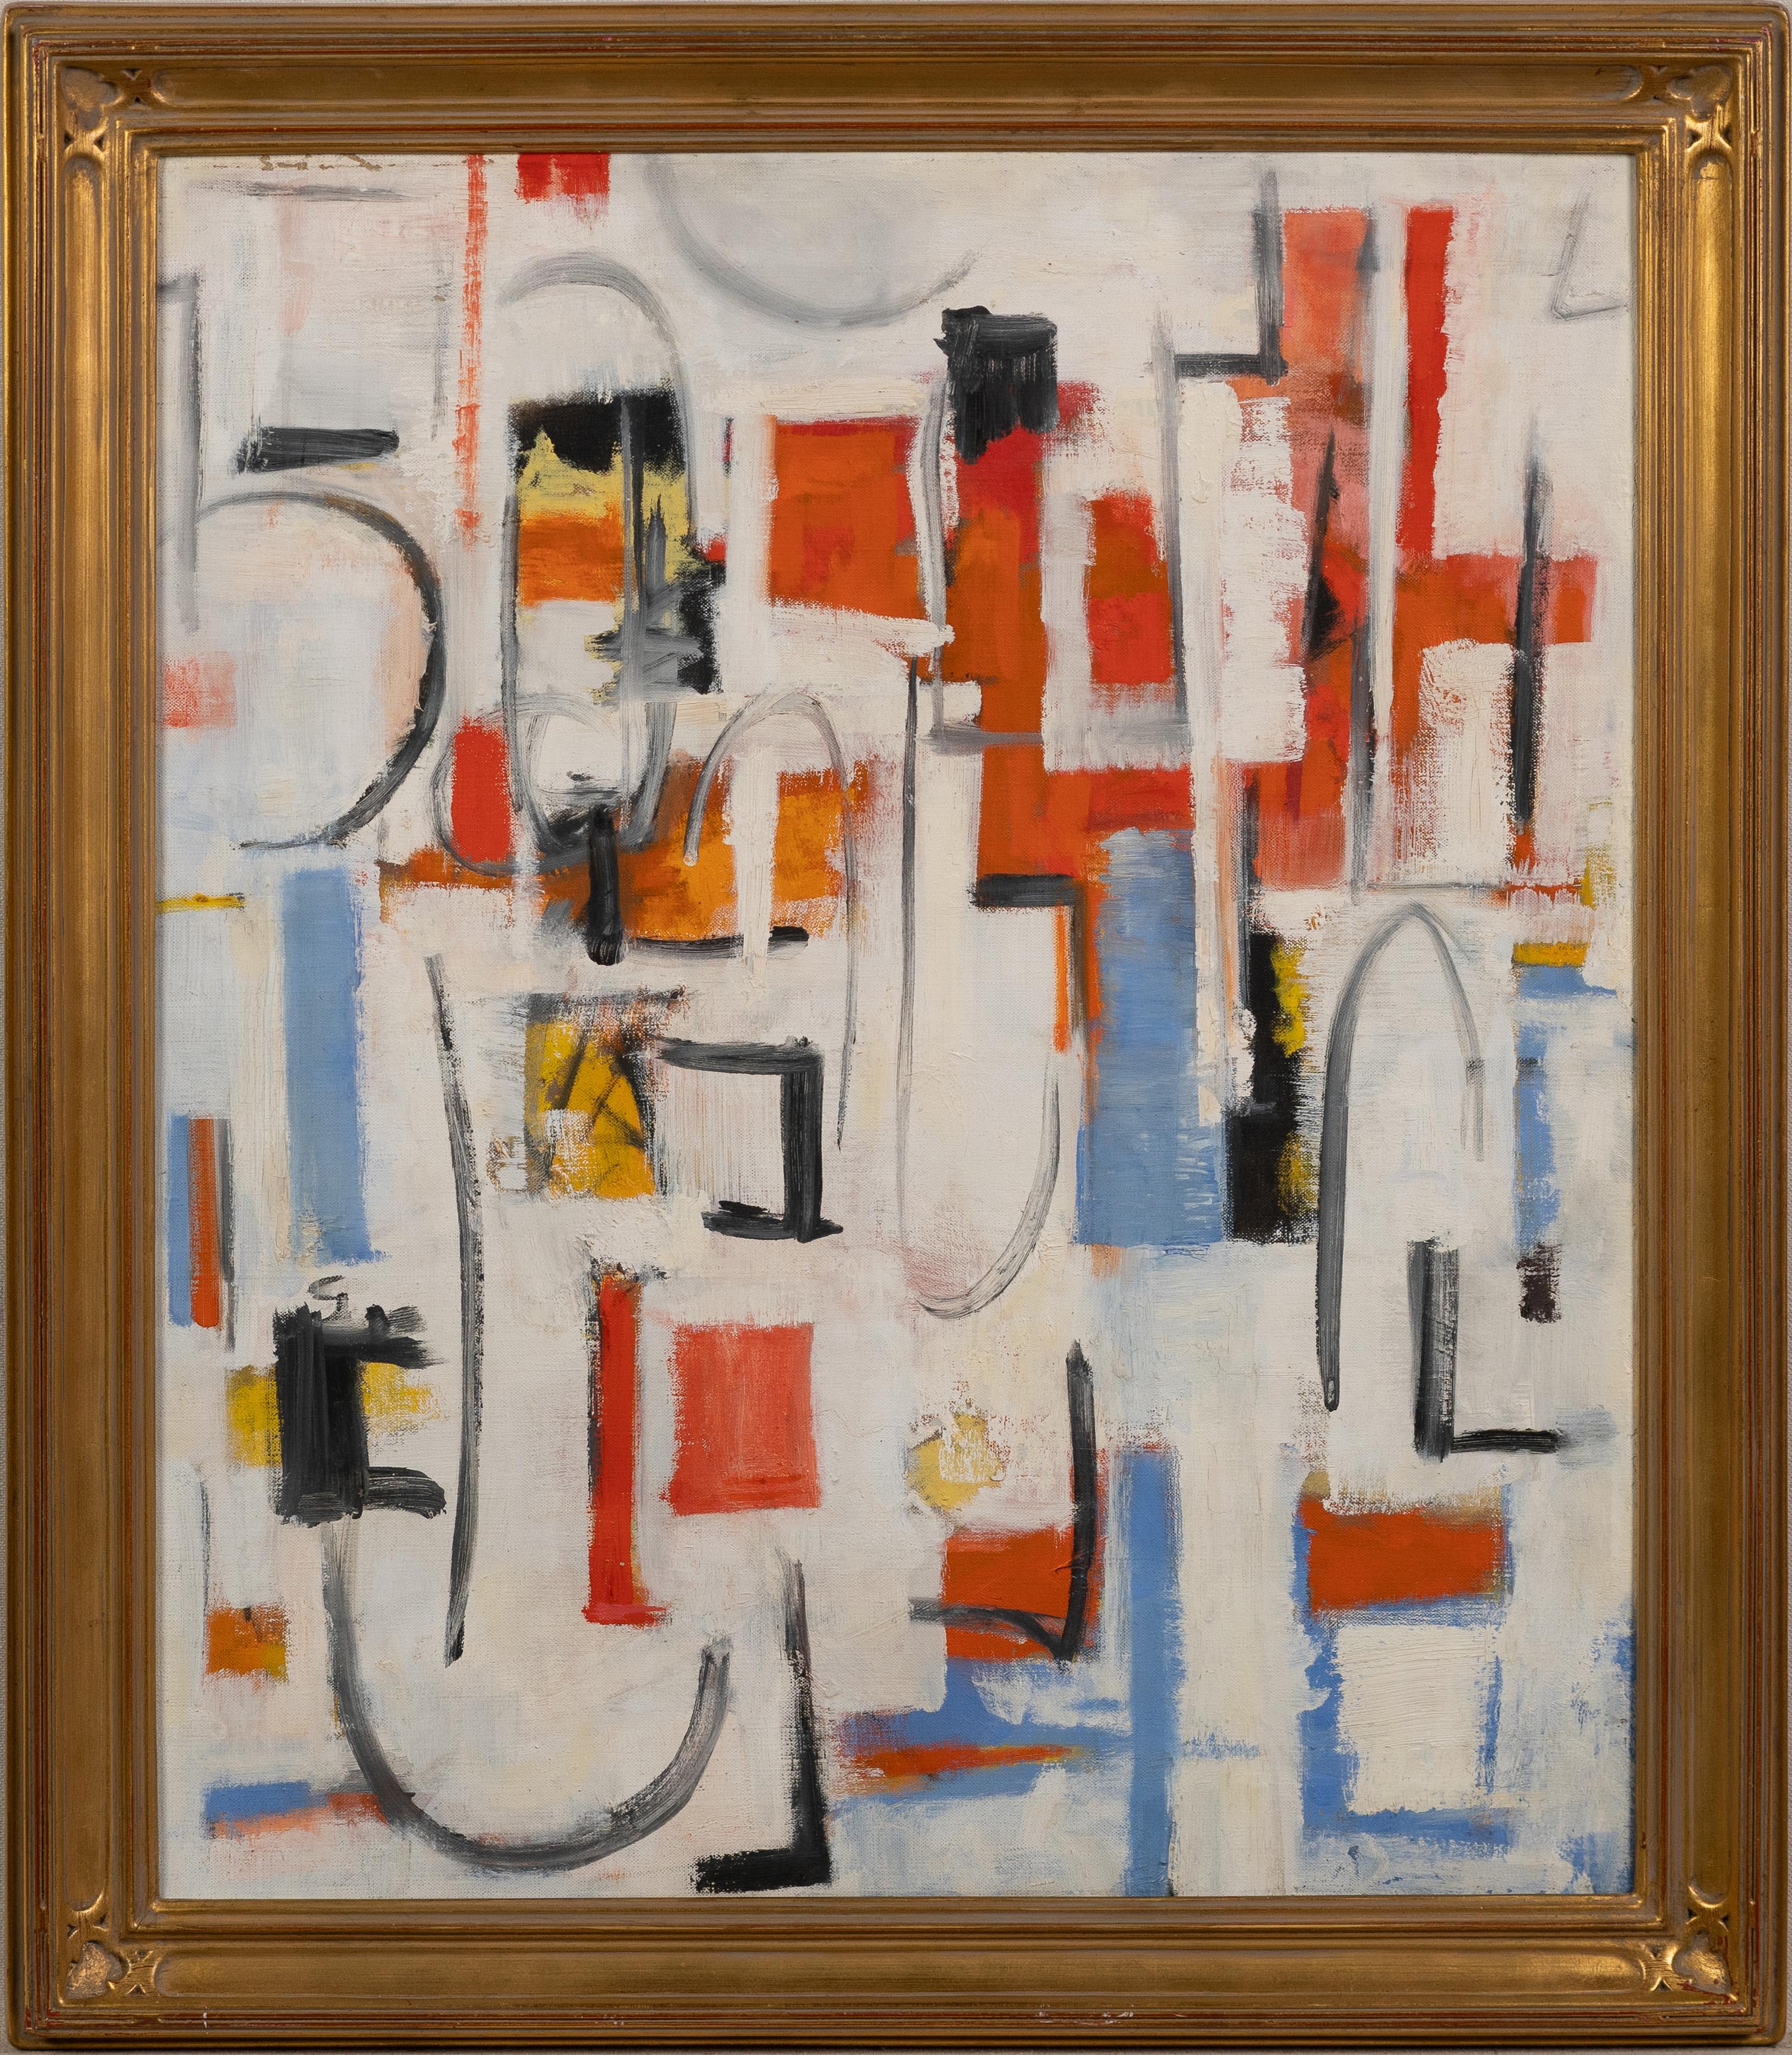 Antique American modernist abstract expressionist oil painting.  Oil on canvas.  Framed.   Signed verso.